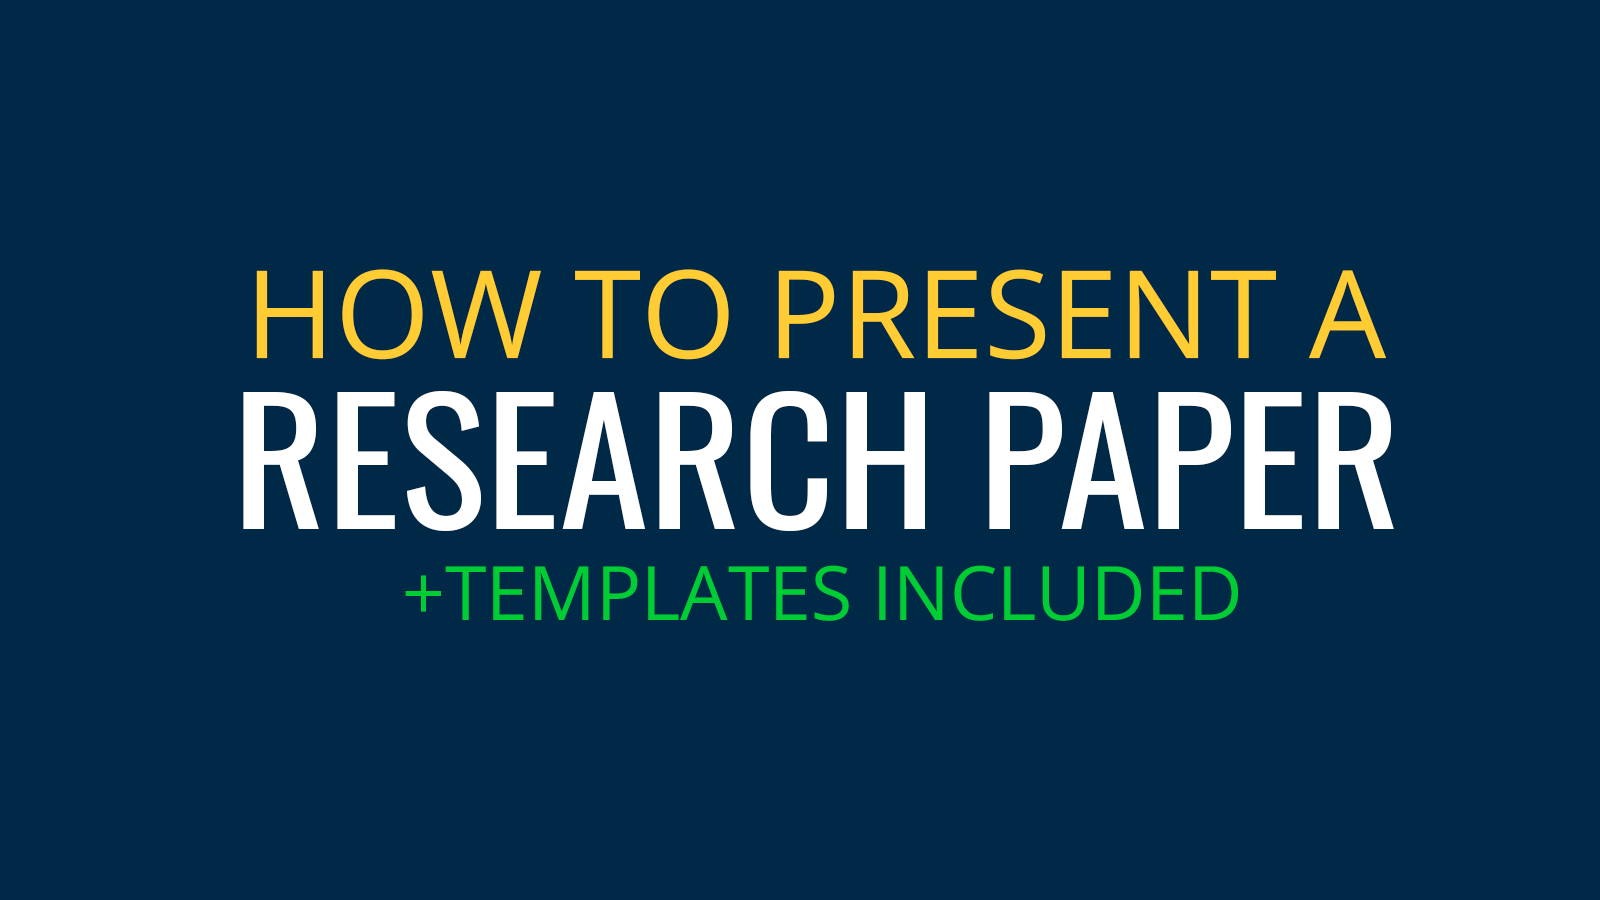 how to present research paper in seminar